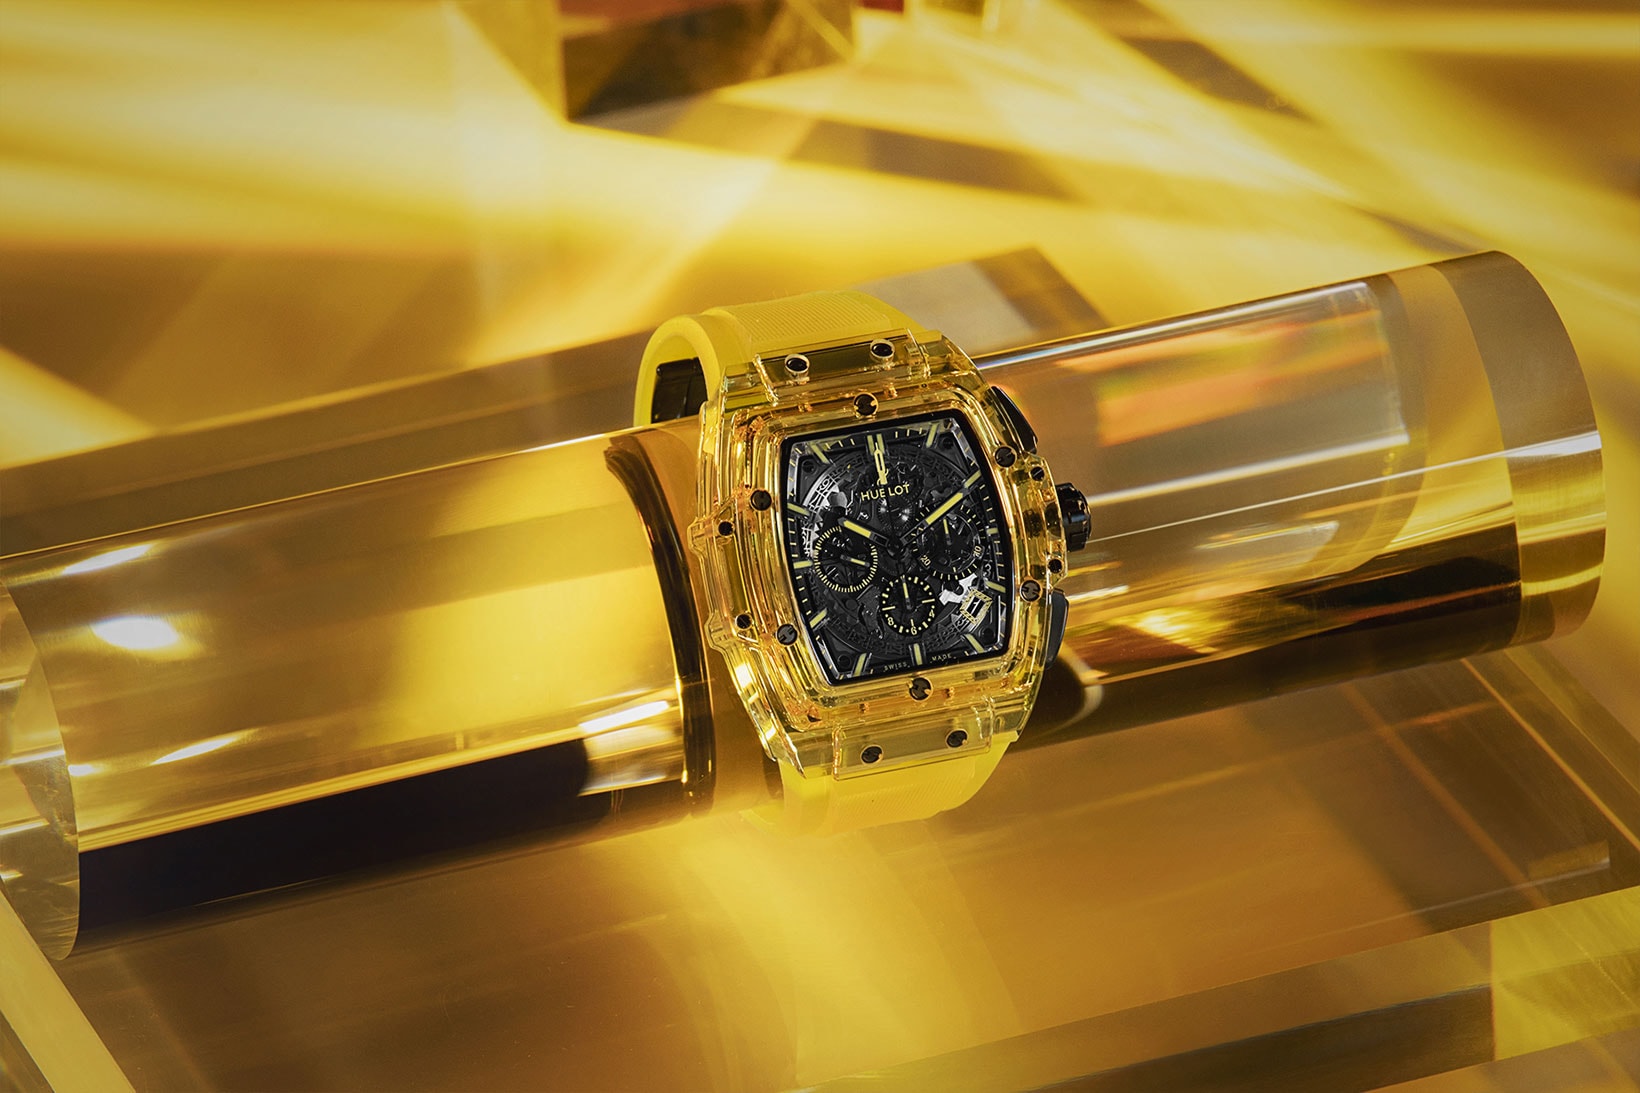 Hublot Launches World's First Yellow Sapphire Watch Timepieces Sapphire Spirit of Big Bang